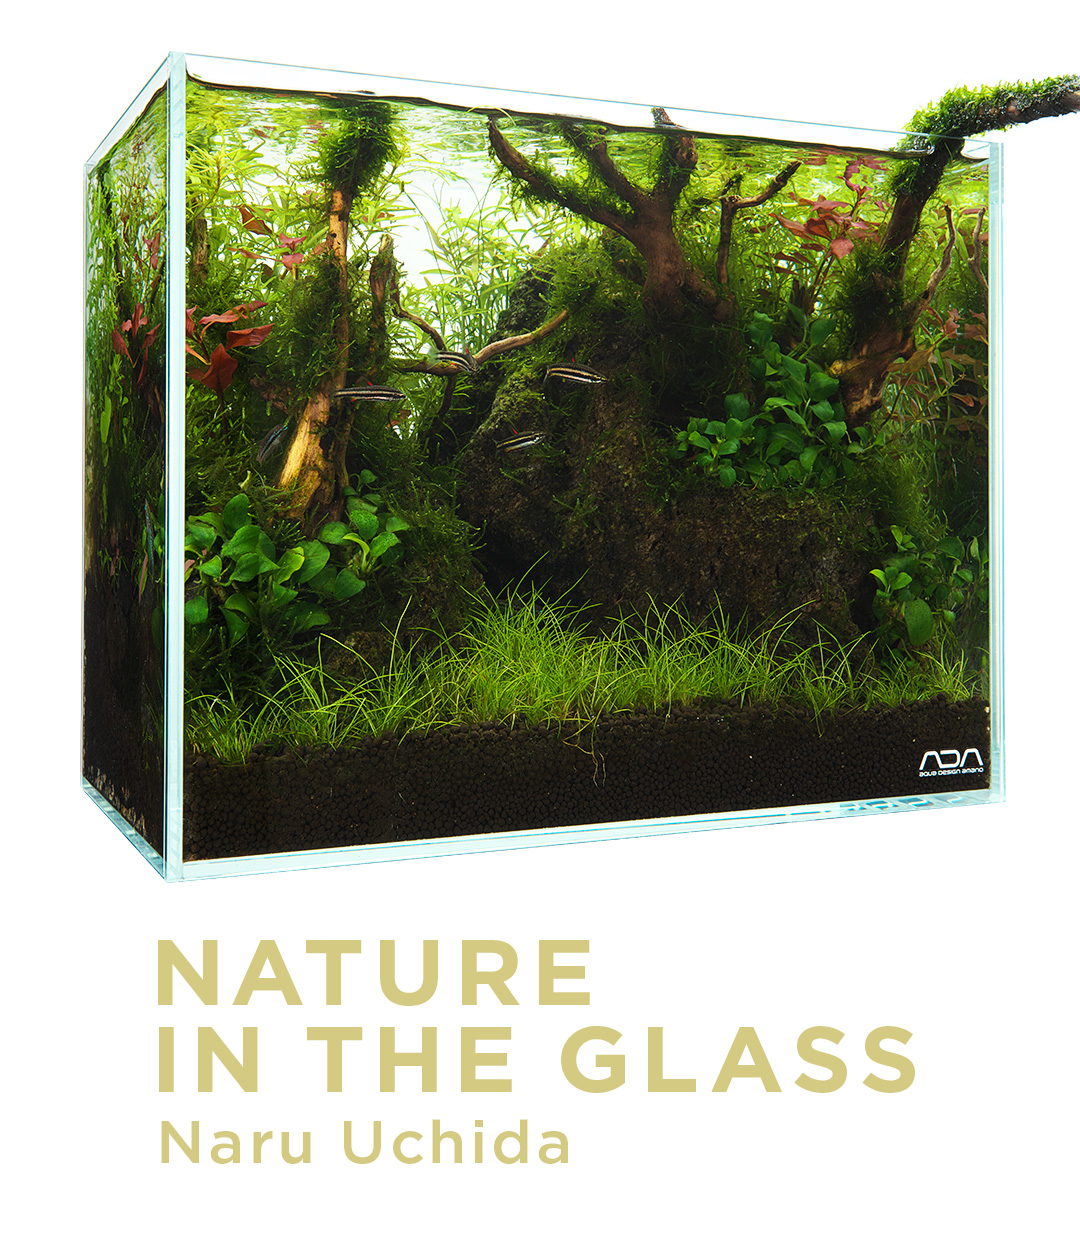 NATURE IN THE GLASS ‘A hideout for fish’